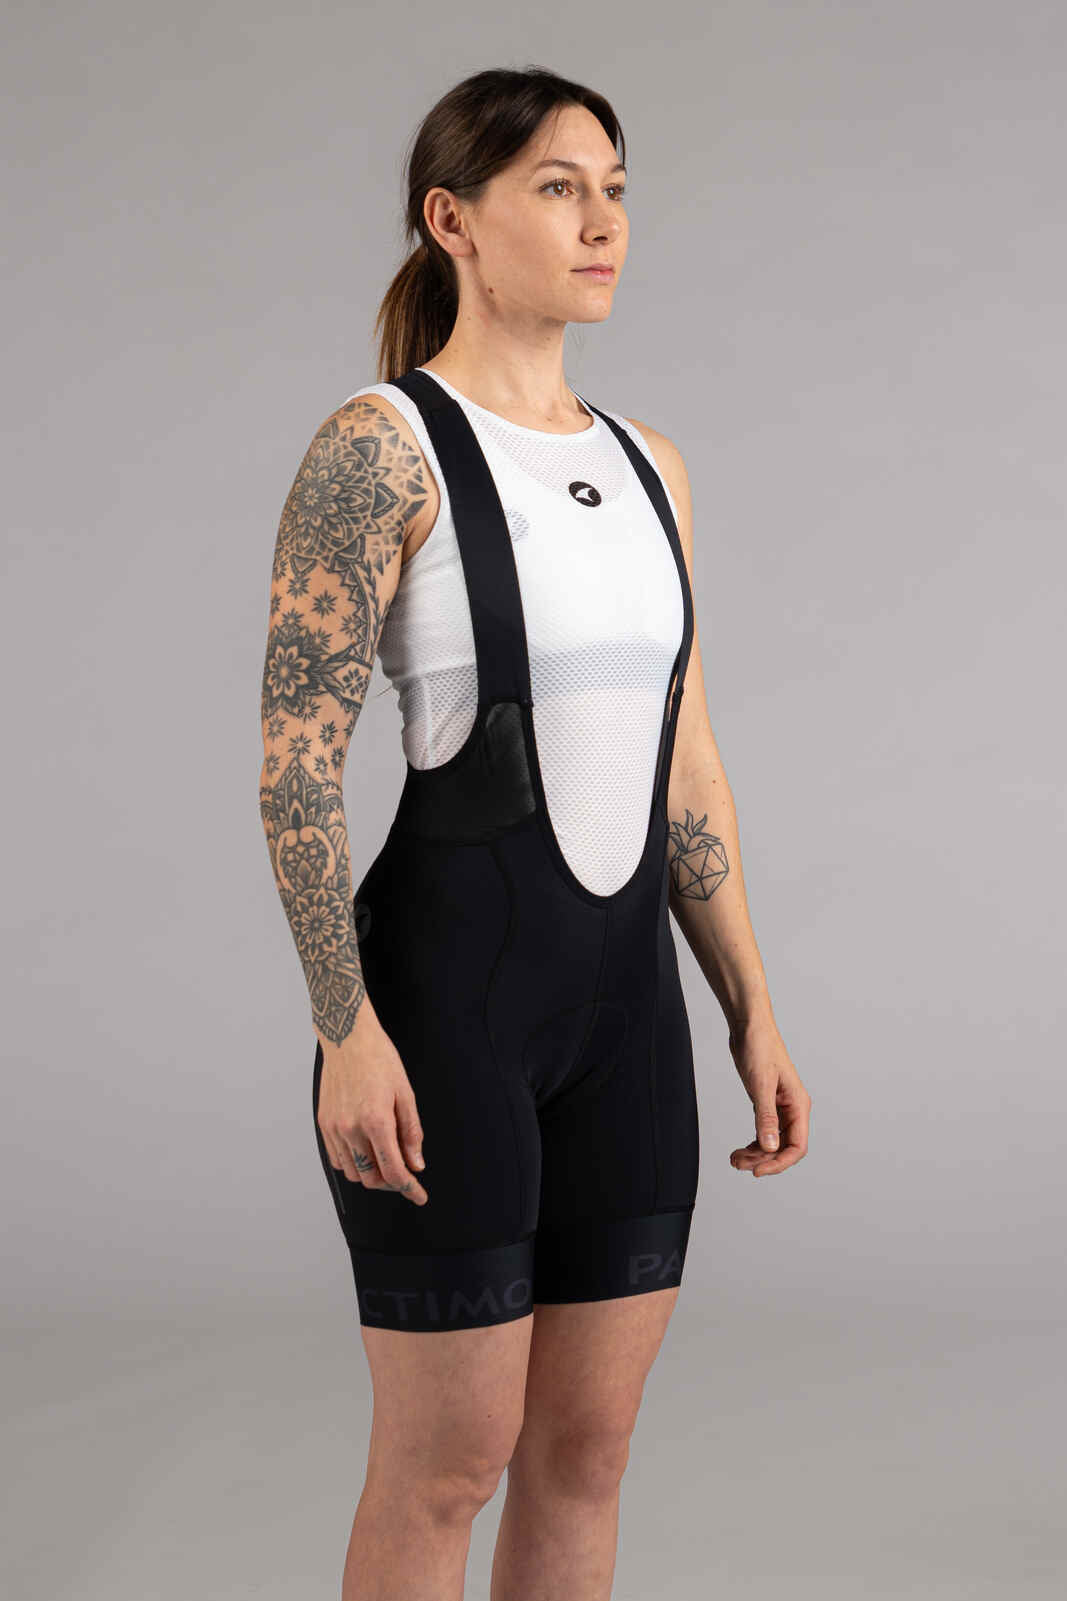 Women's Cycling Bibs - Ascent Vector Pro Front View